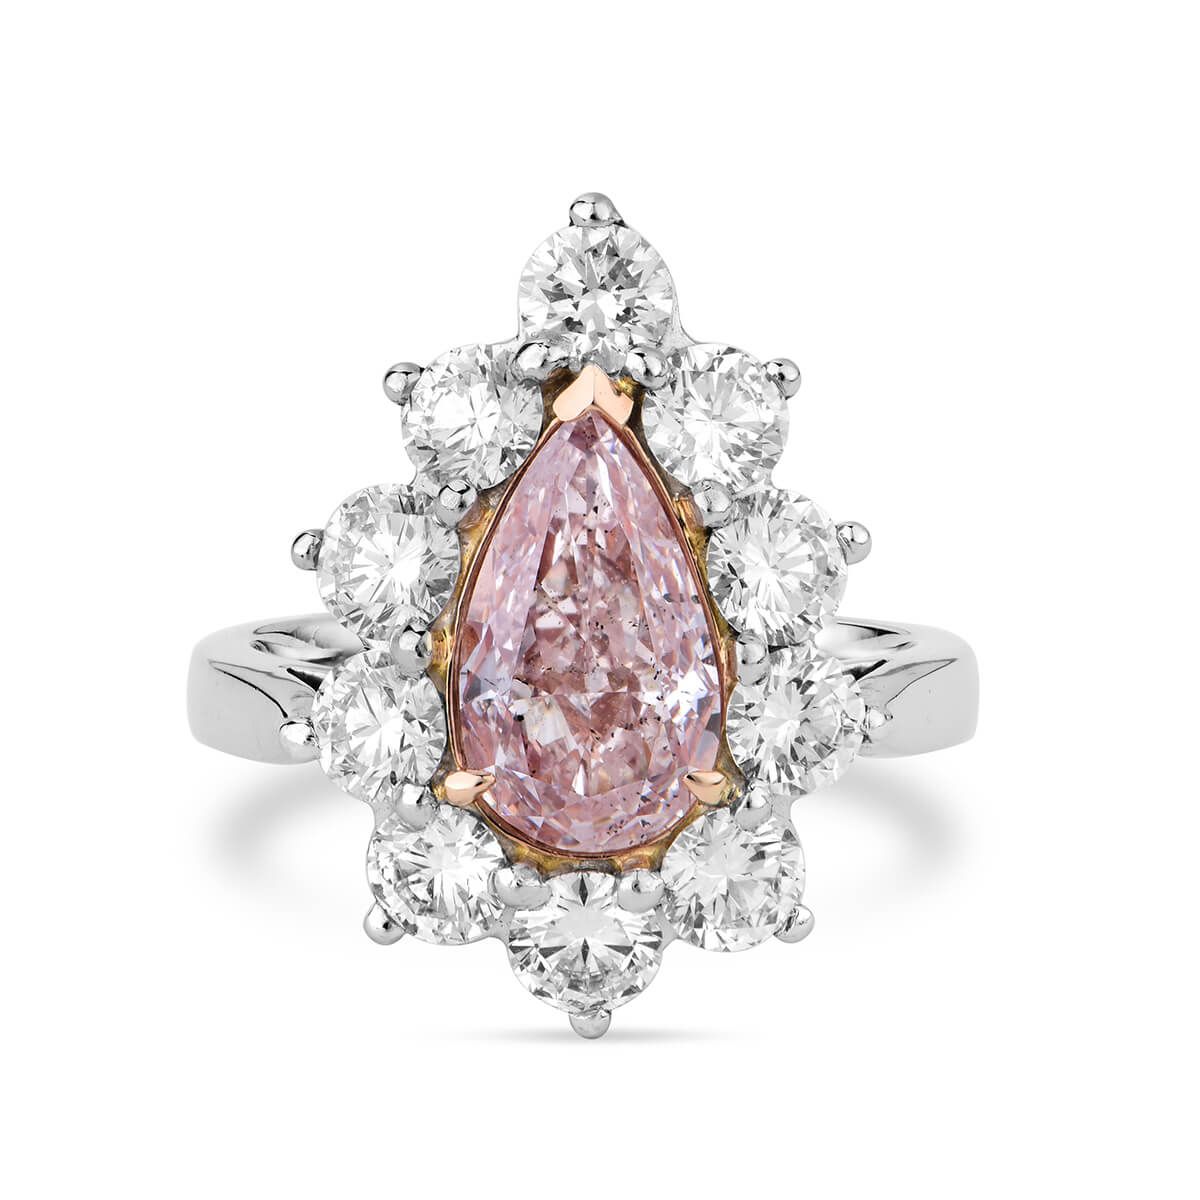 Very Light Pink Diamond Ring, 4.11 Ct. TW, Pear shape, GIA Certified, 5161612944